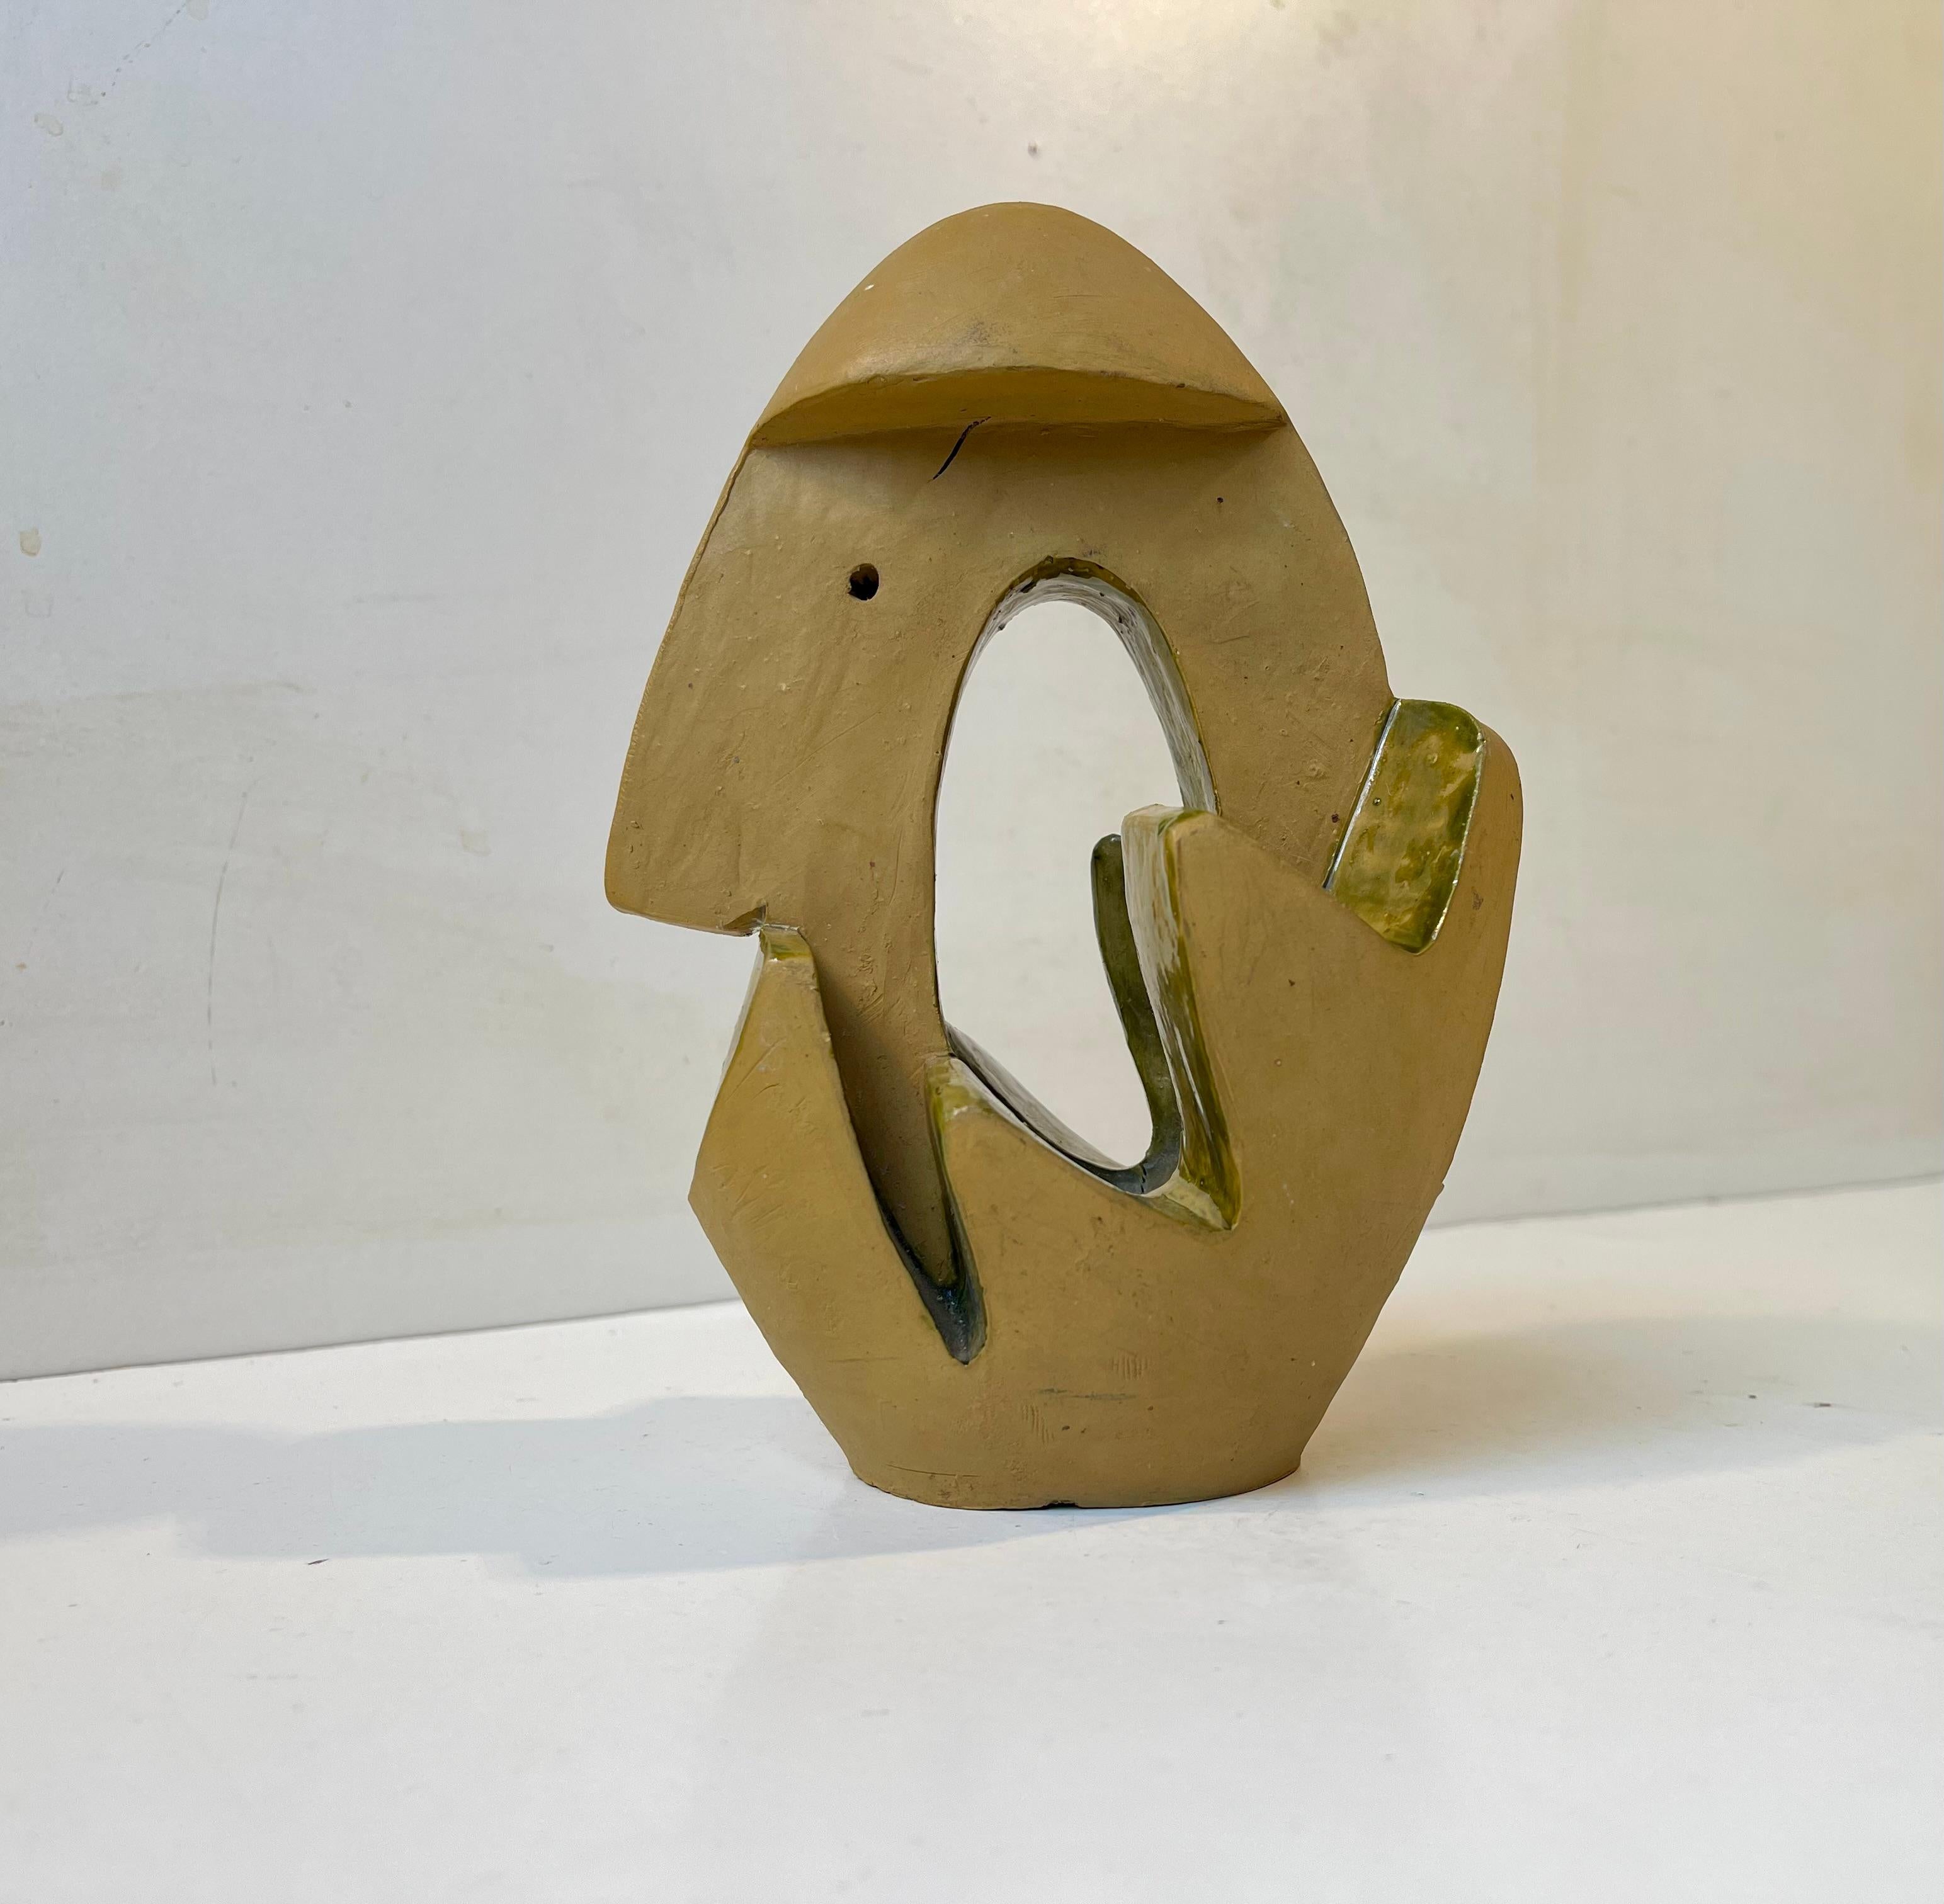 A 1960s sculptural surrealist figurine/ornament in partially glazed and hand-painted ceramic. An abstract form based upon an ovoid main shape. The main color is mustard and the applied glaze olive/pickle in tonality.  Uniquely made by the Danish